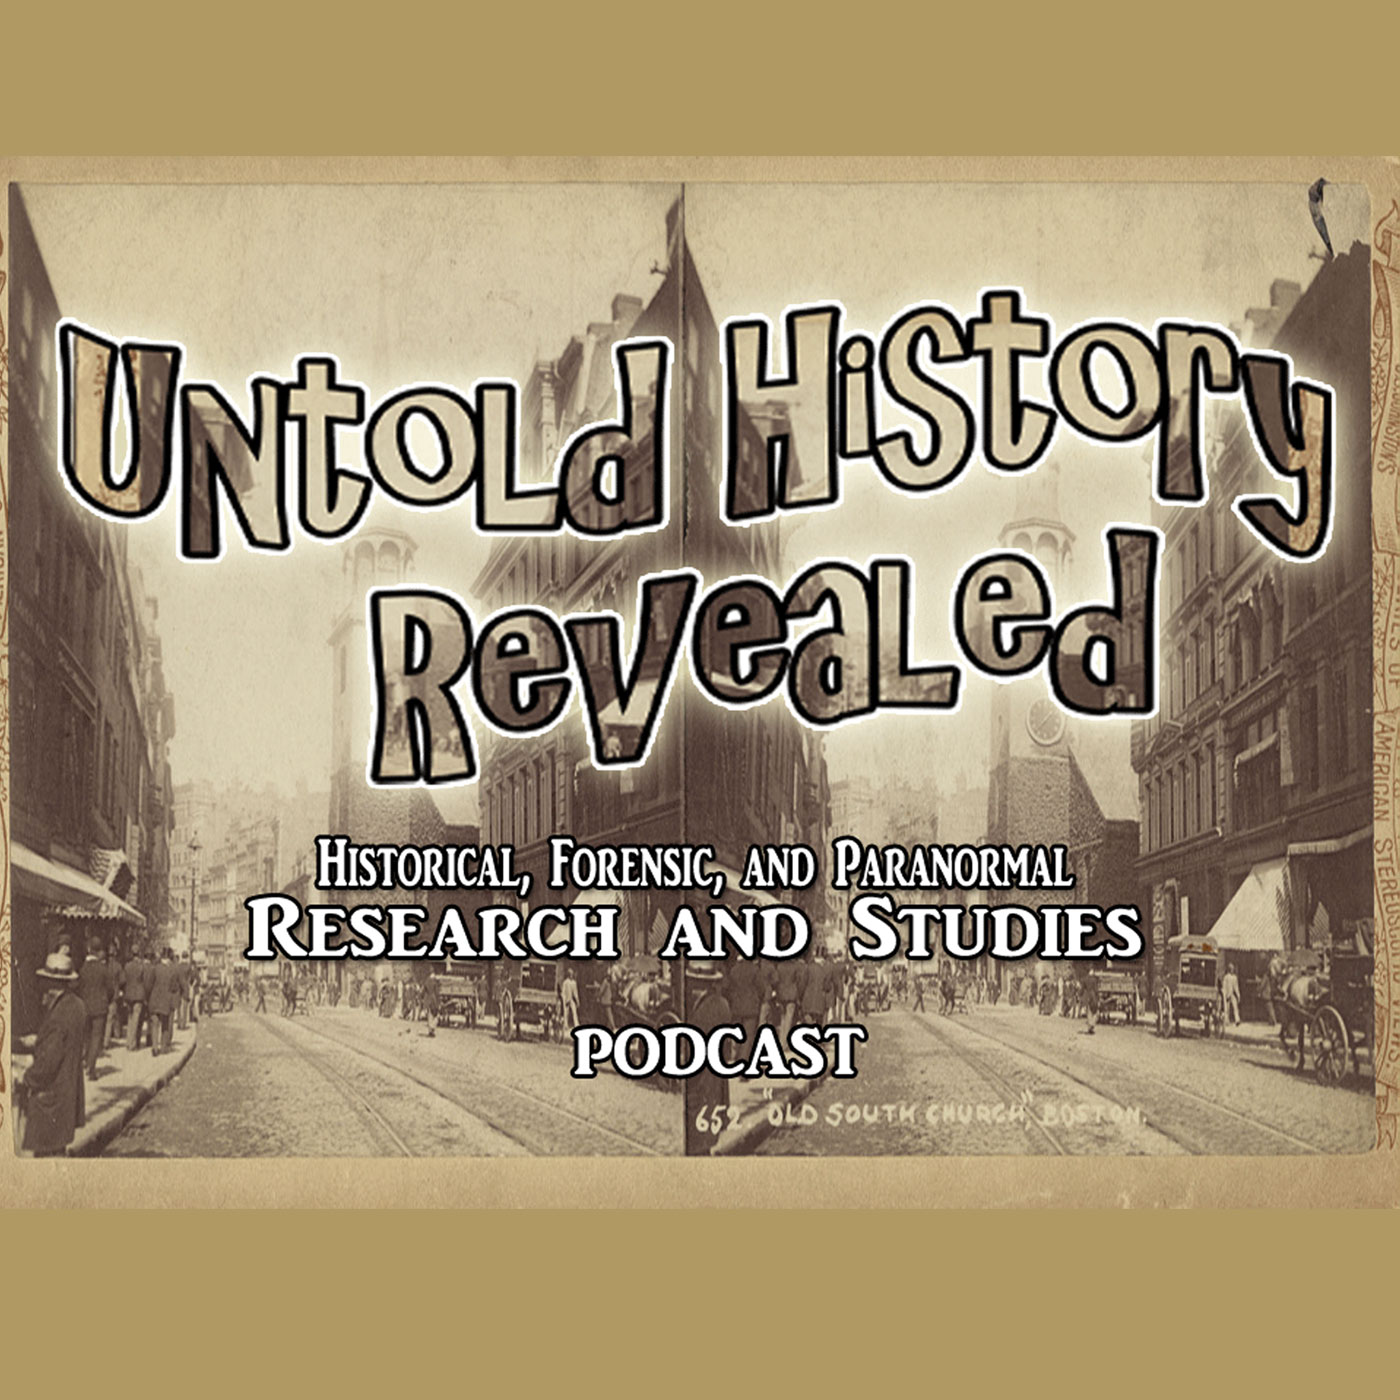 S2E12 - 1893 Columbian Expostion - Tragedies - Untold History Revealed